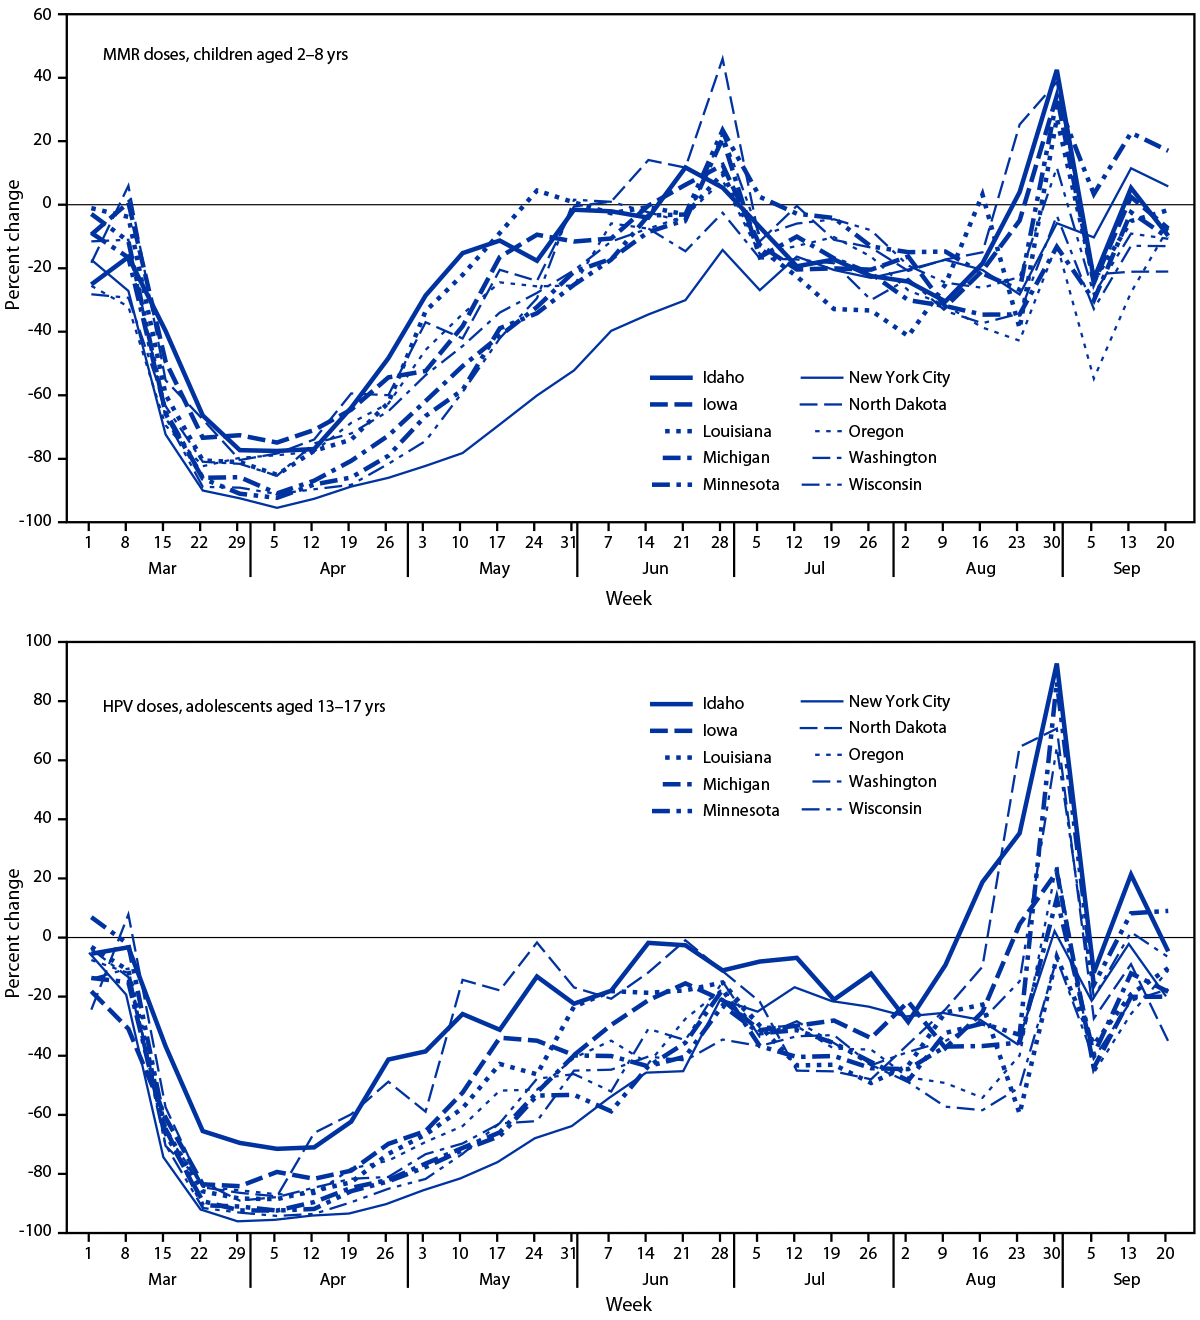 The figure consists of two line graphs. The first line graph shows the percent change in measles, mumps, and rubella vaccine doses administered to children aged 2–8 years during March–September 2020 compared with the average number of doses administered during the same period in 2018 and 2019 across 10 U.S. jurisdictions. The second line graph shows the percent change in human papillomavirus vaccine doses administered to adolescents aged 13–17 years during March–September 2020 compared with the average number of doses administered during the same period in 2018 and 2019 across 10. U.S. jurisdictions.